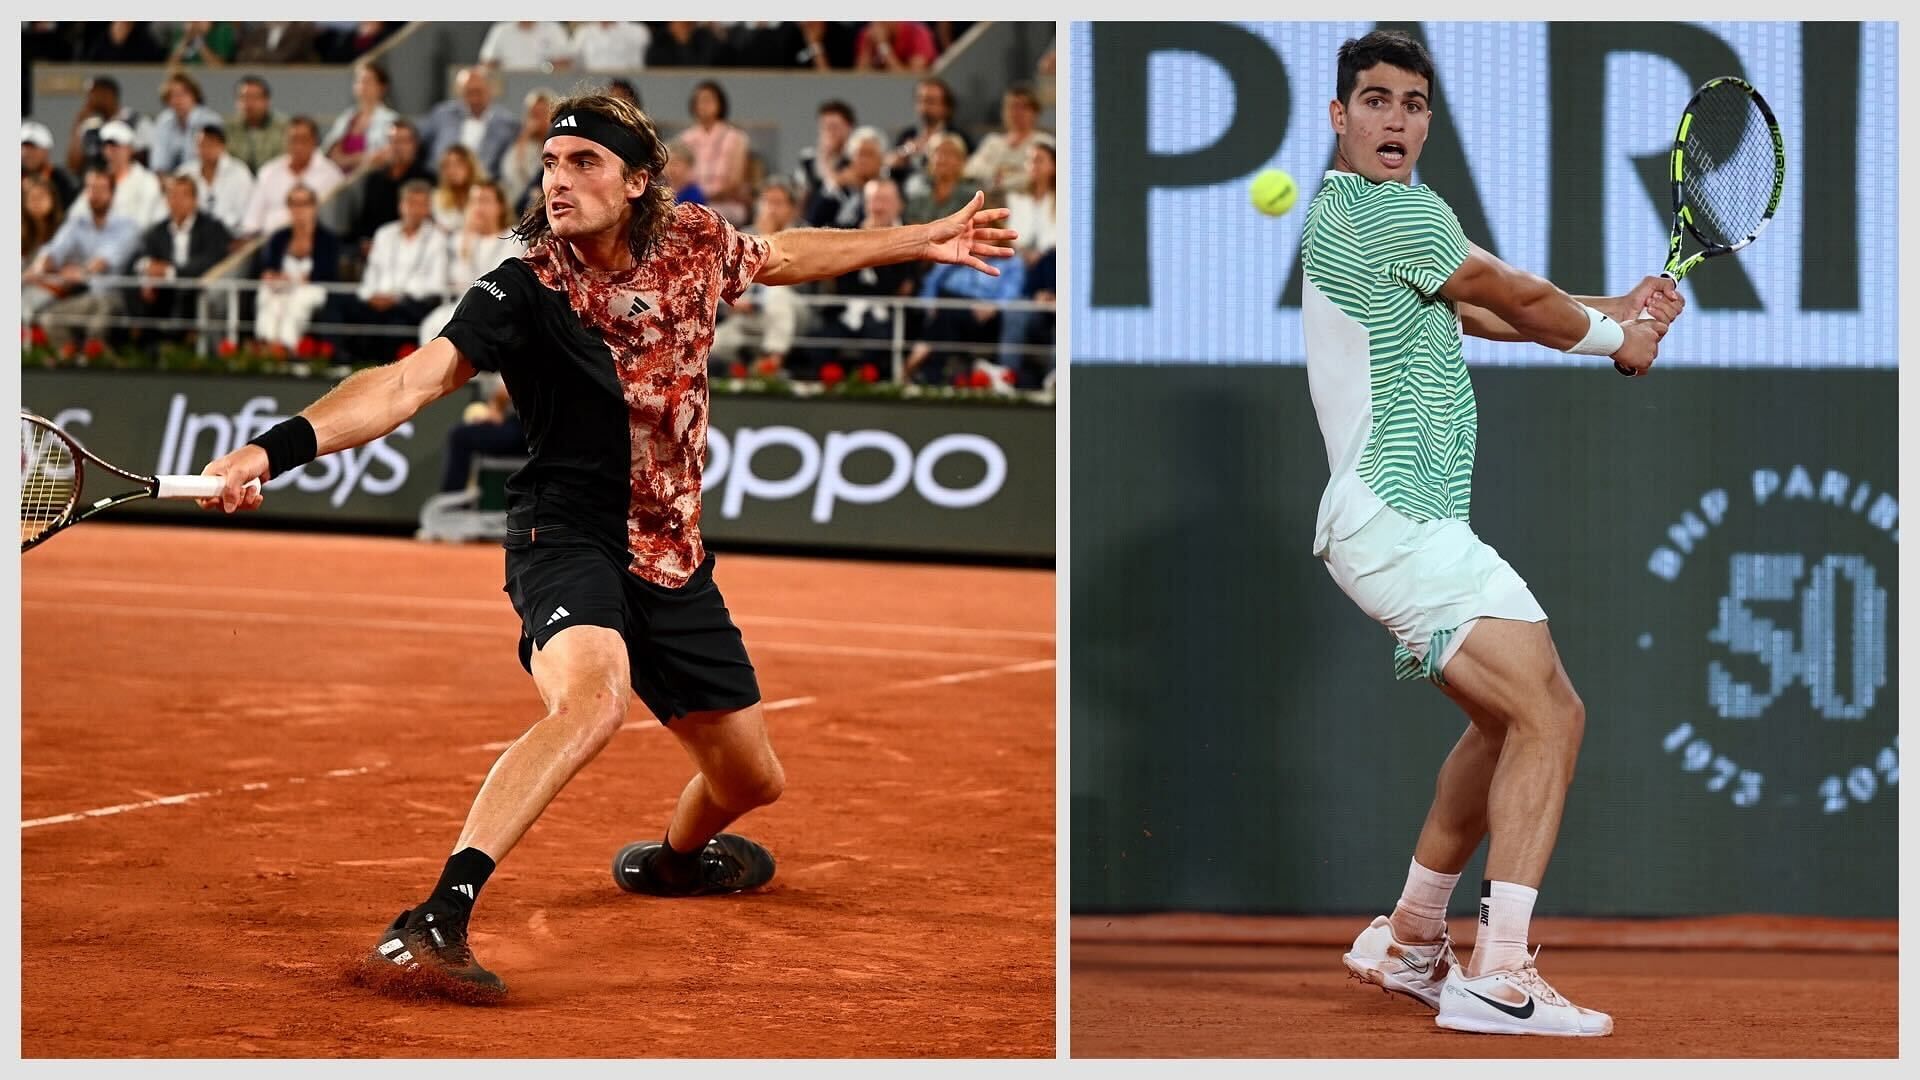 Carlos Alcaraz (right) had a crushing win over Stefanos Tsitsipas in the quarterfinal on Tuesday.